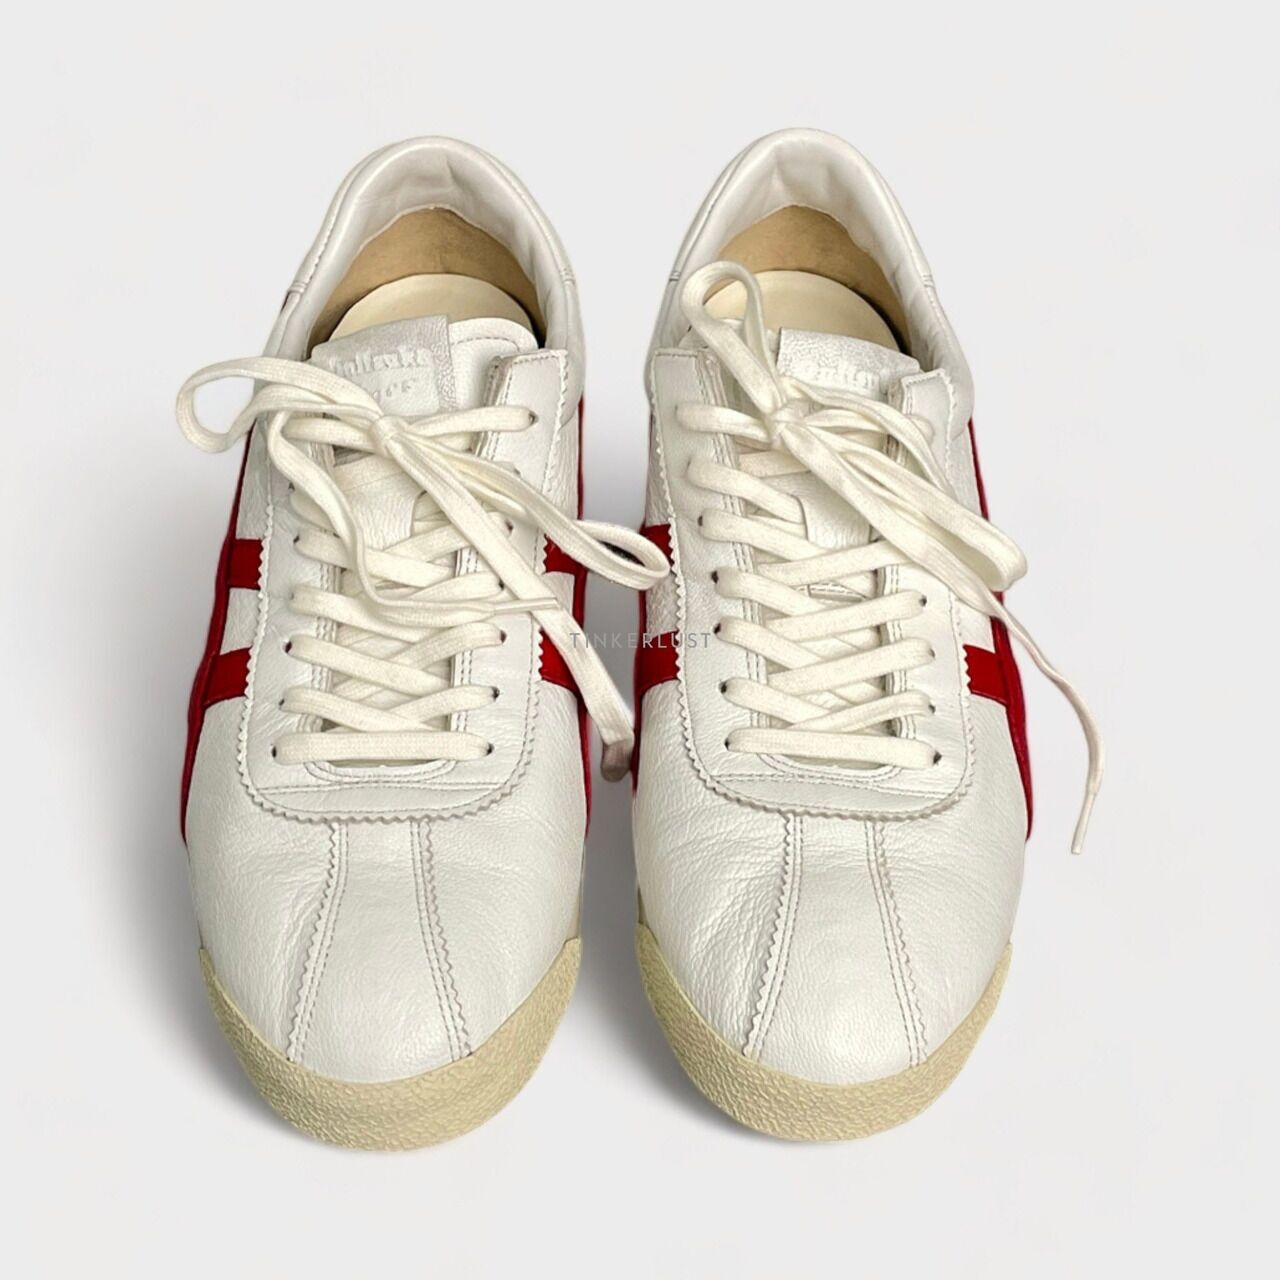 Onitsuka Tiger Corsair Deluxe White Classic Sneakers